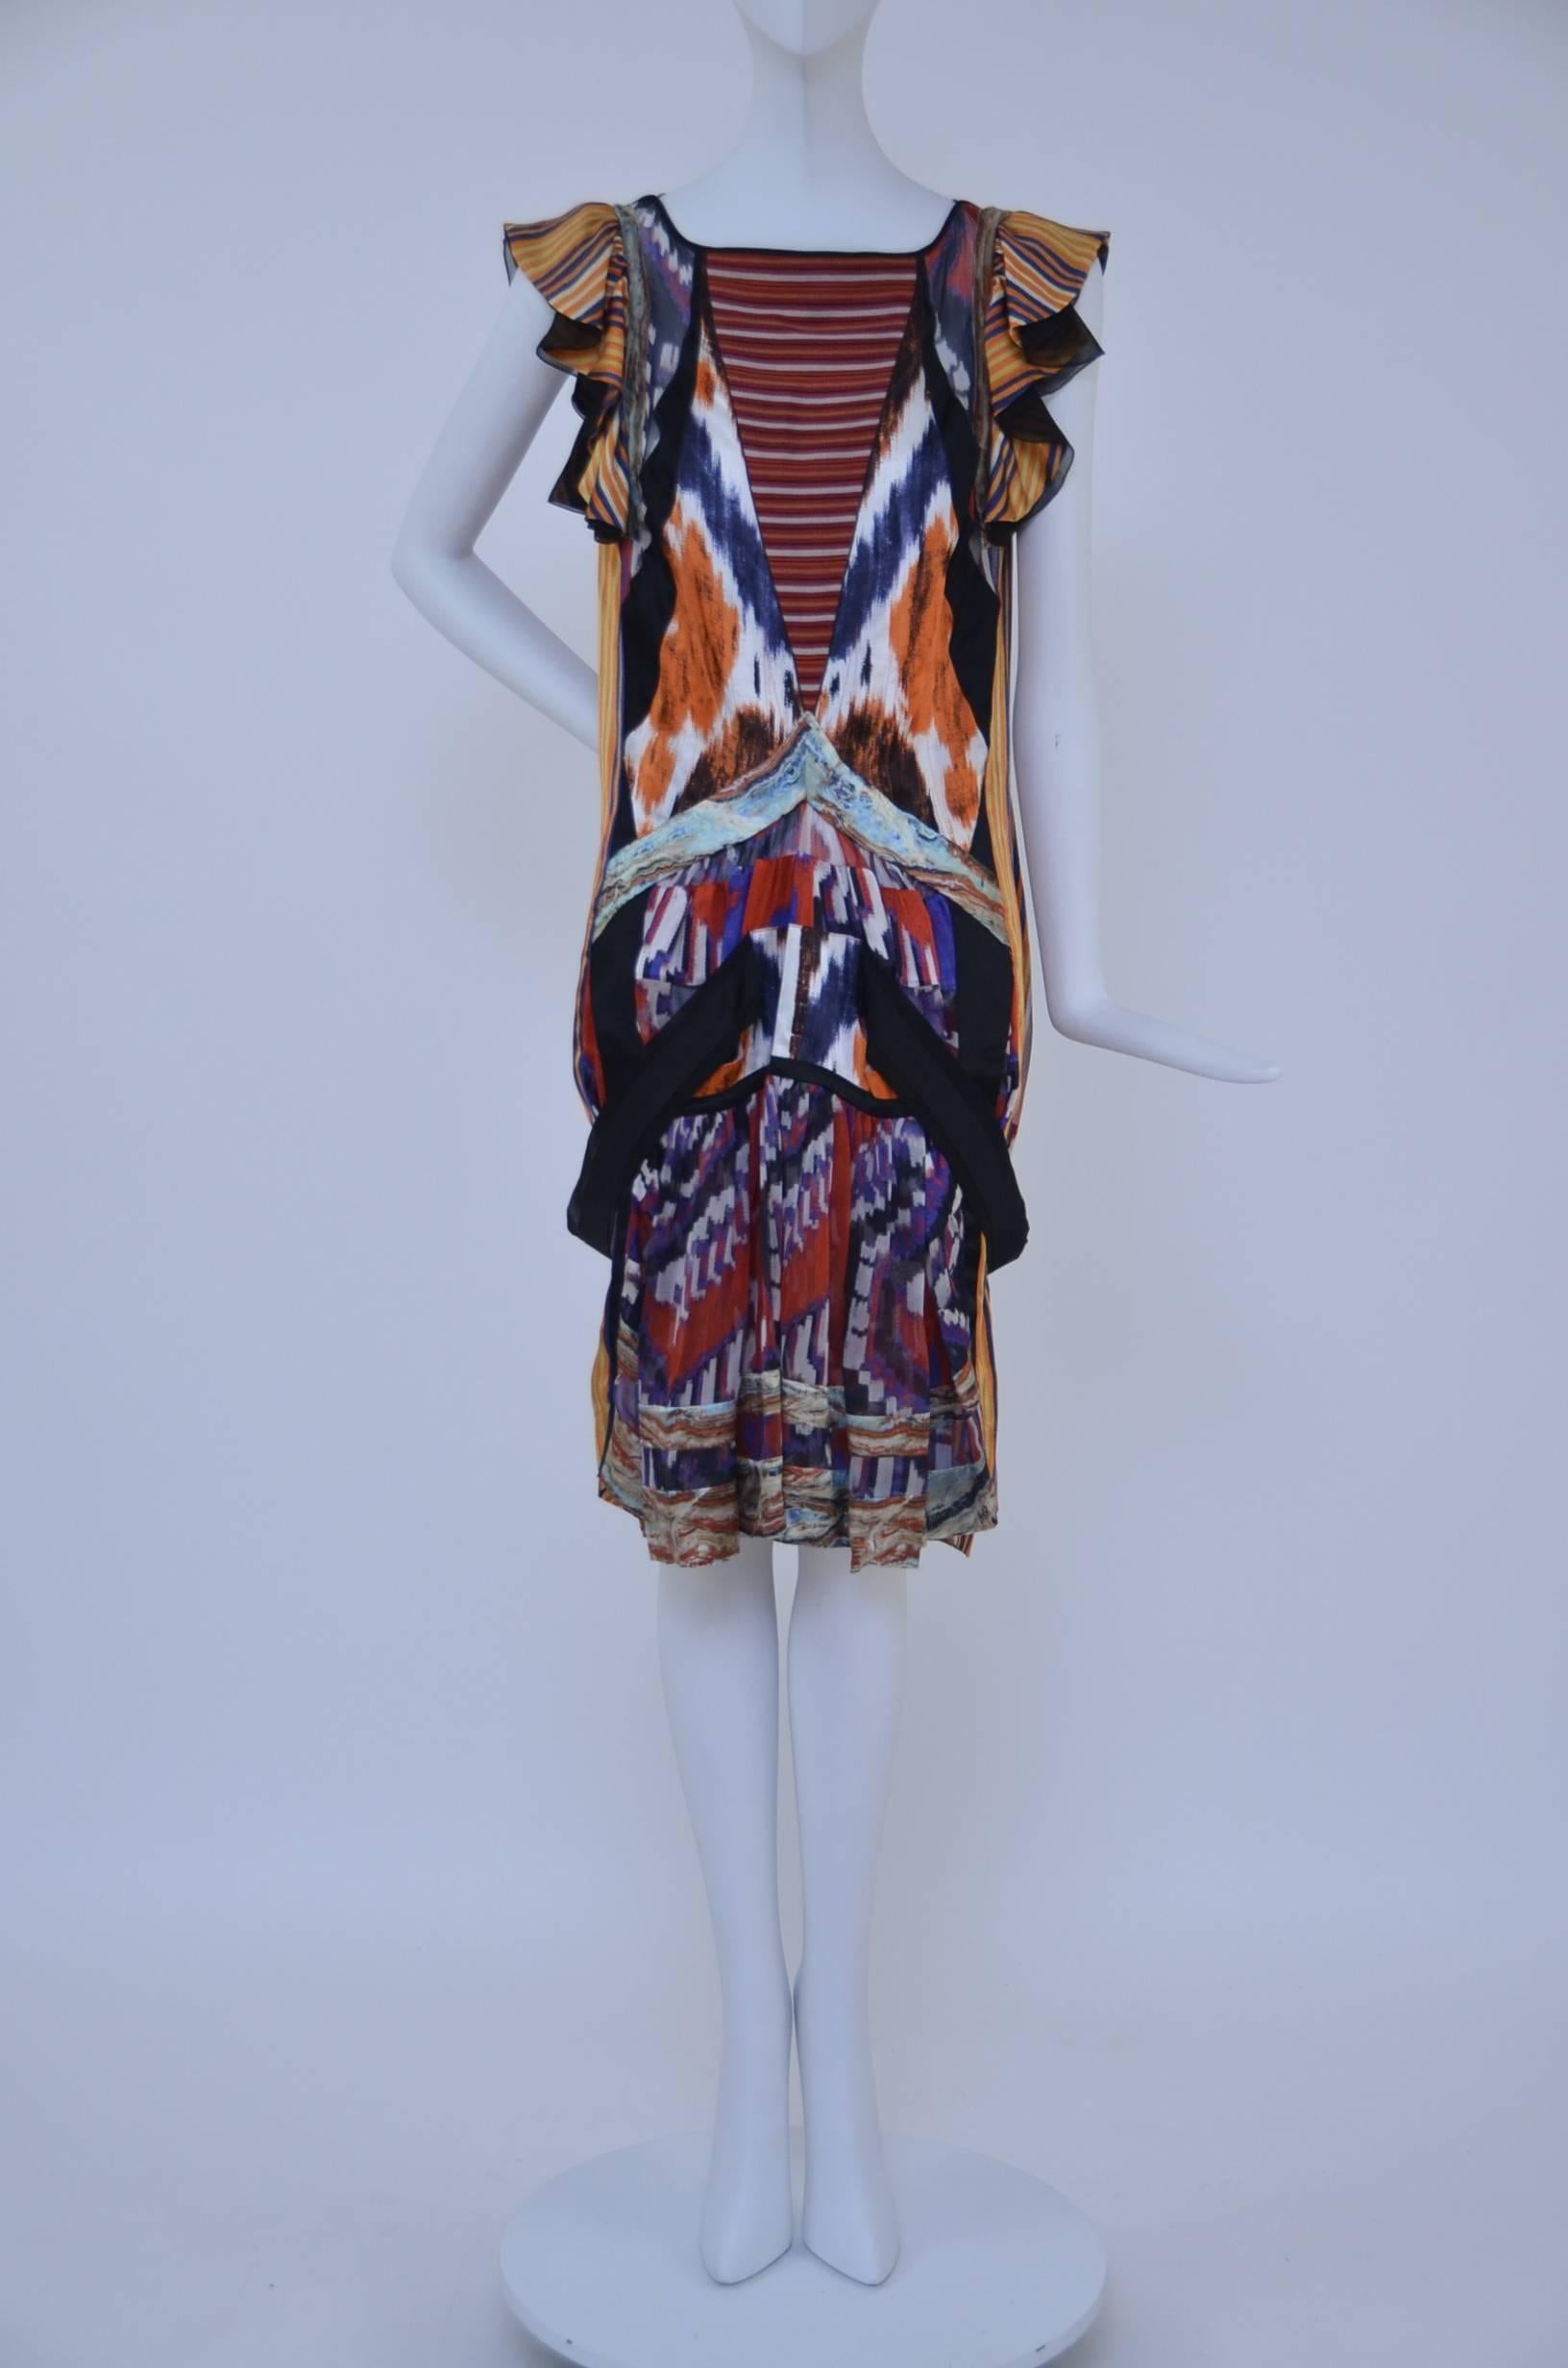 Balenciaga   Nicolas Ghesquière  Runway Silk Ikat print dress .
Condition:Excellent new without tags.
Very collectible collection.
Fabric contents label tag missing but fabric is 100% silk.
Some parts of the dress are sheer and slip is